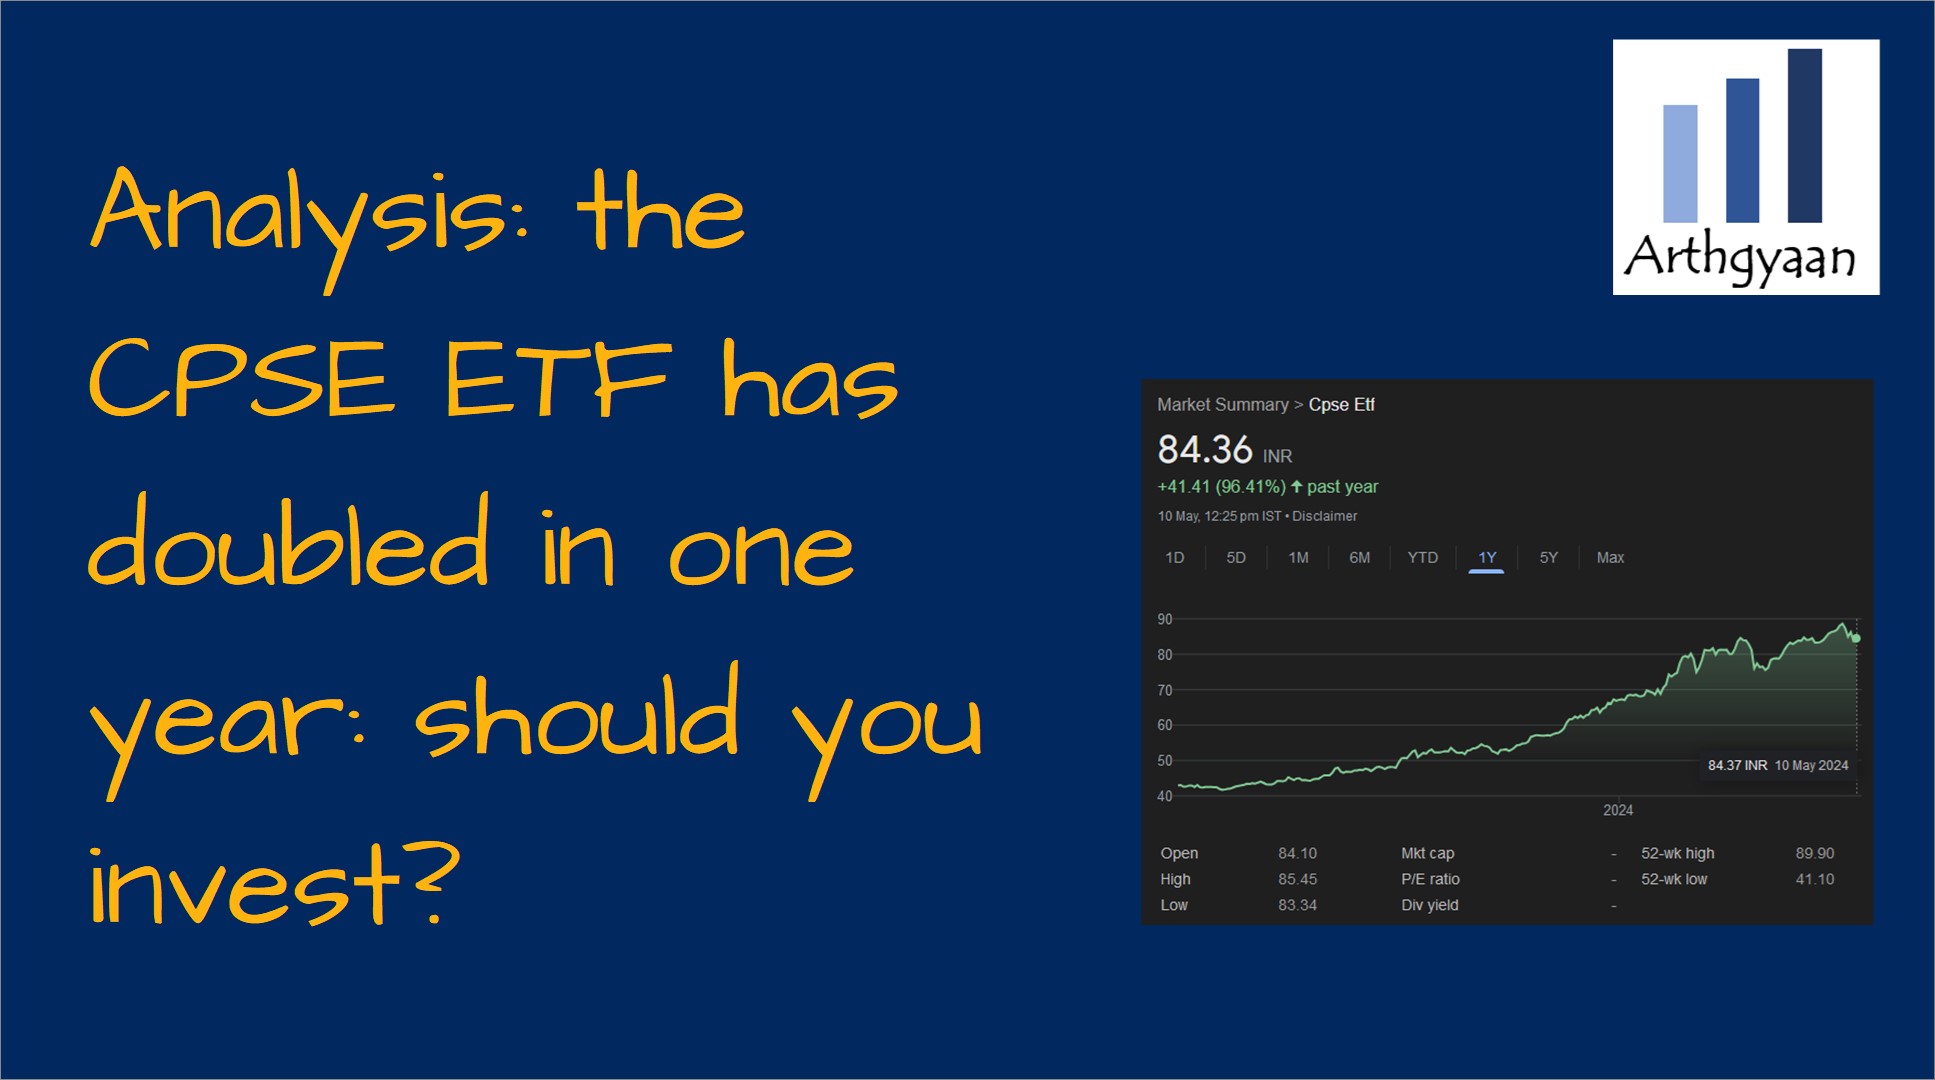 Analysis: the CPSE ETF has doubled in one year: should you invest?